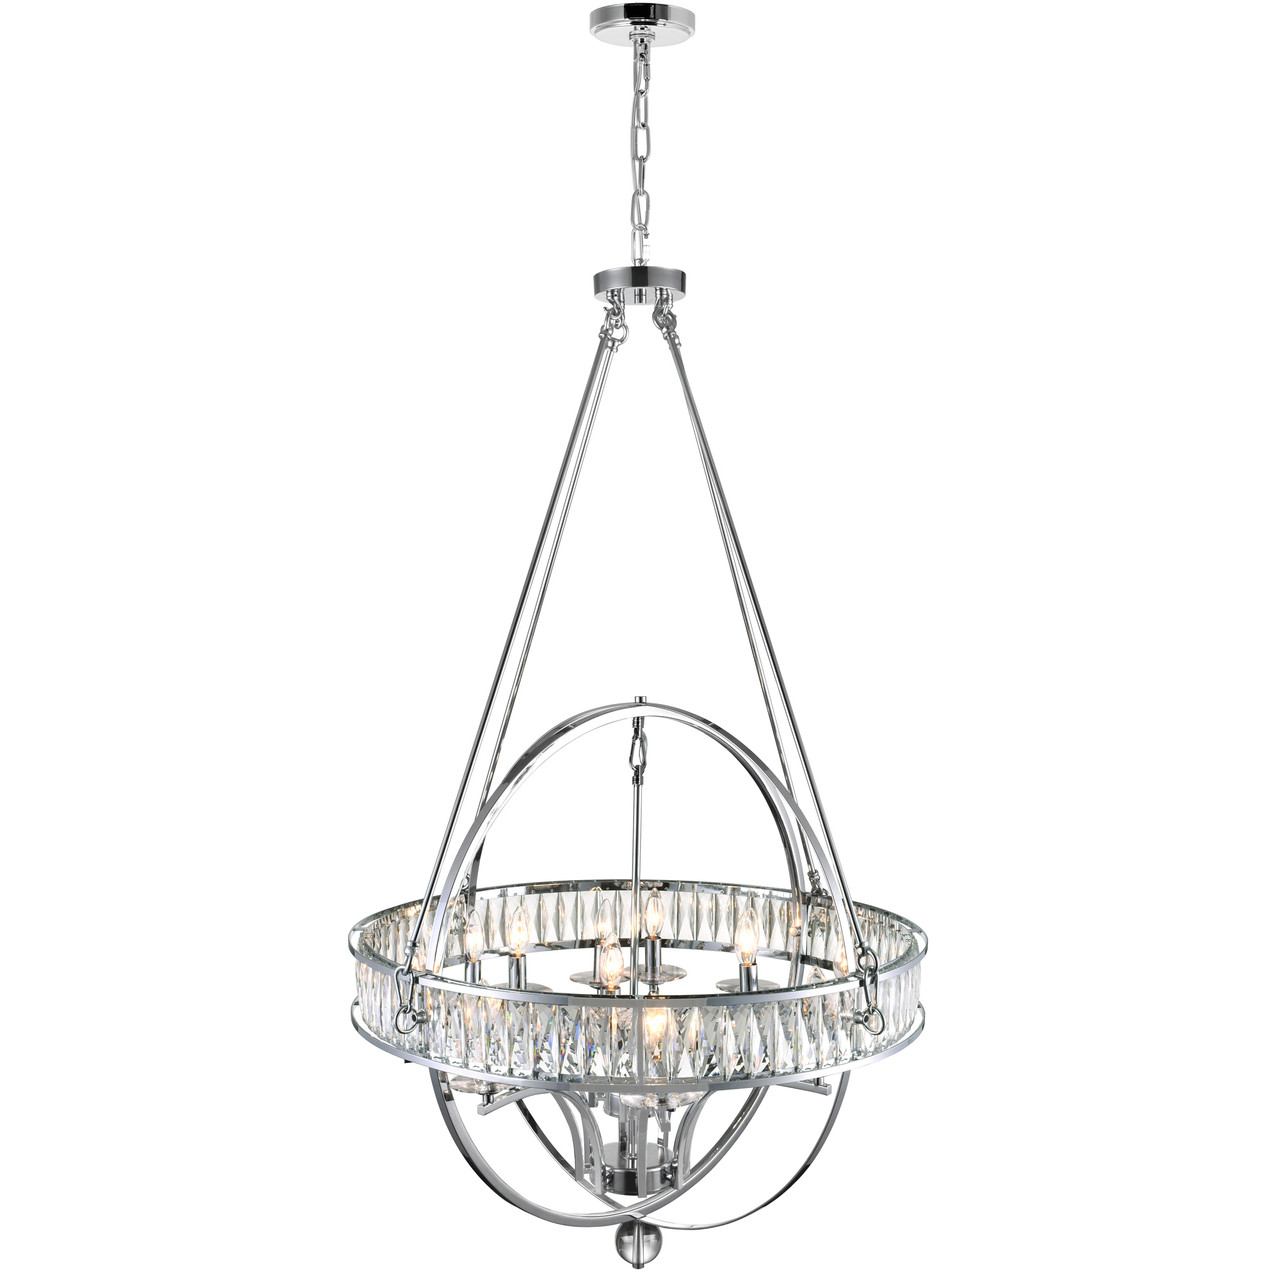 CWI LIGHTING 9957P42-12-601 12 Light  Chandelier with Chrome finish